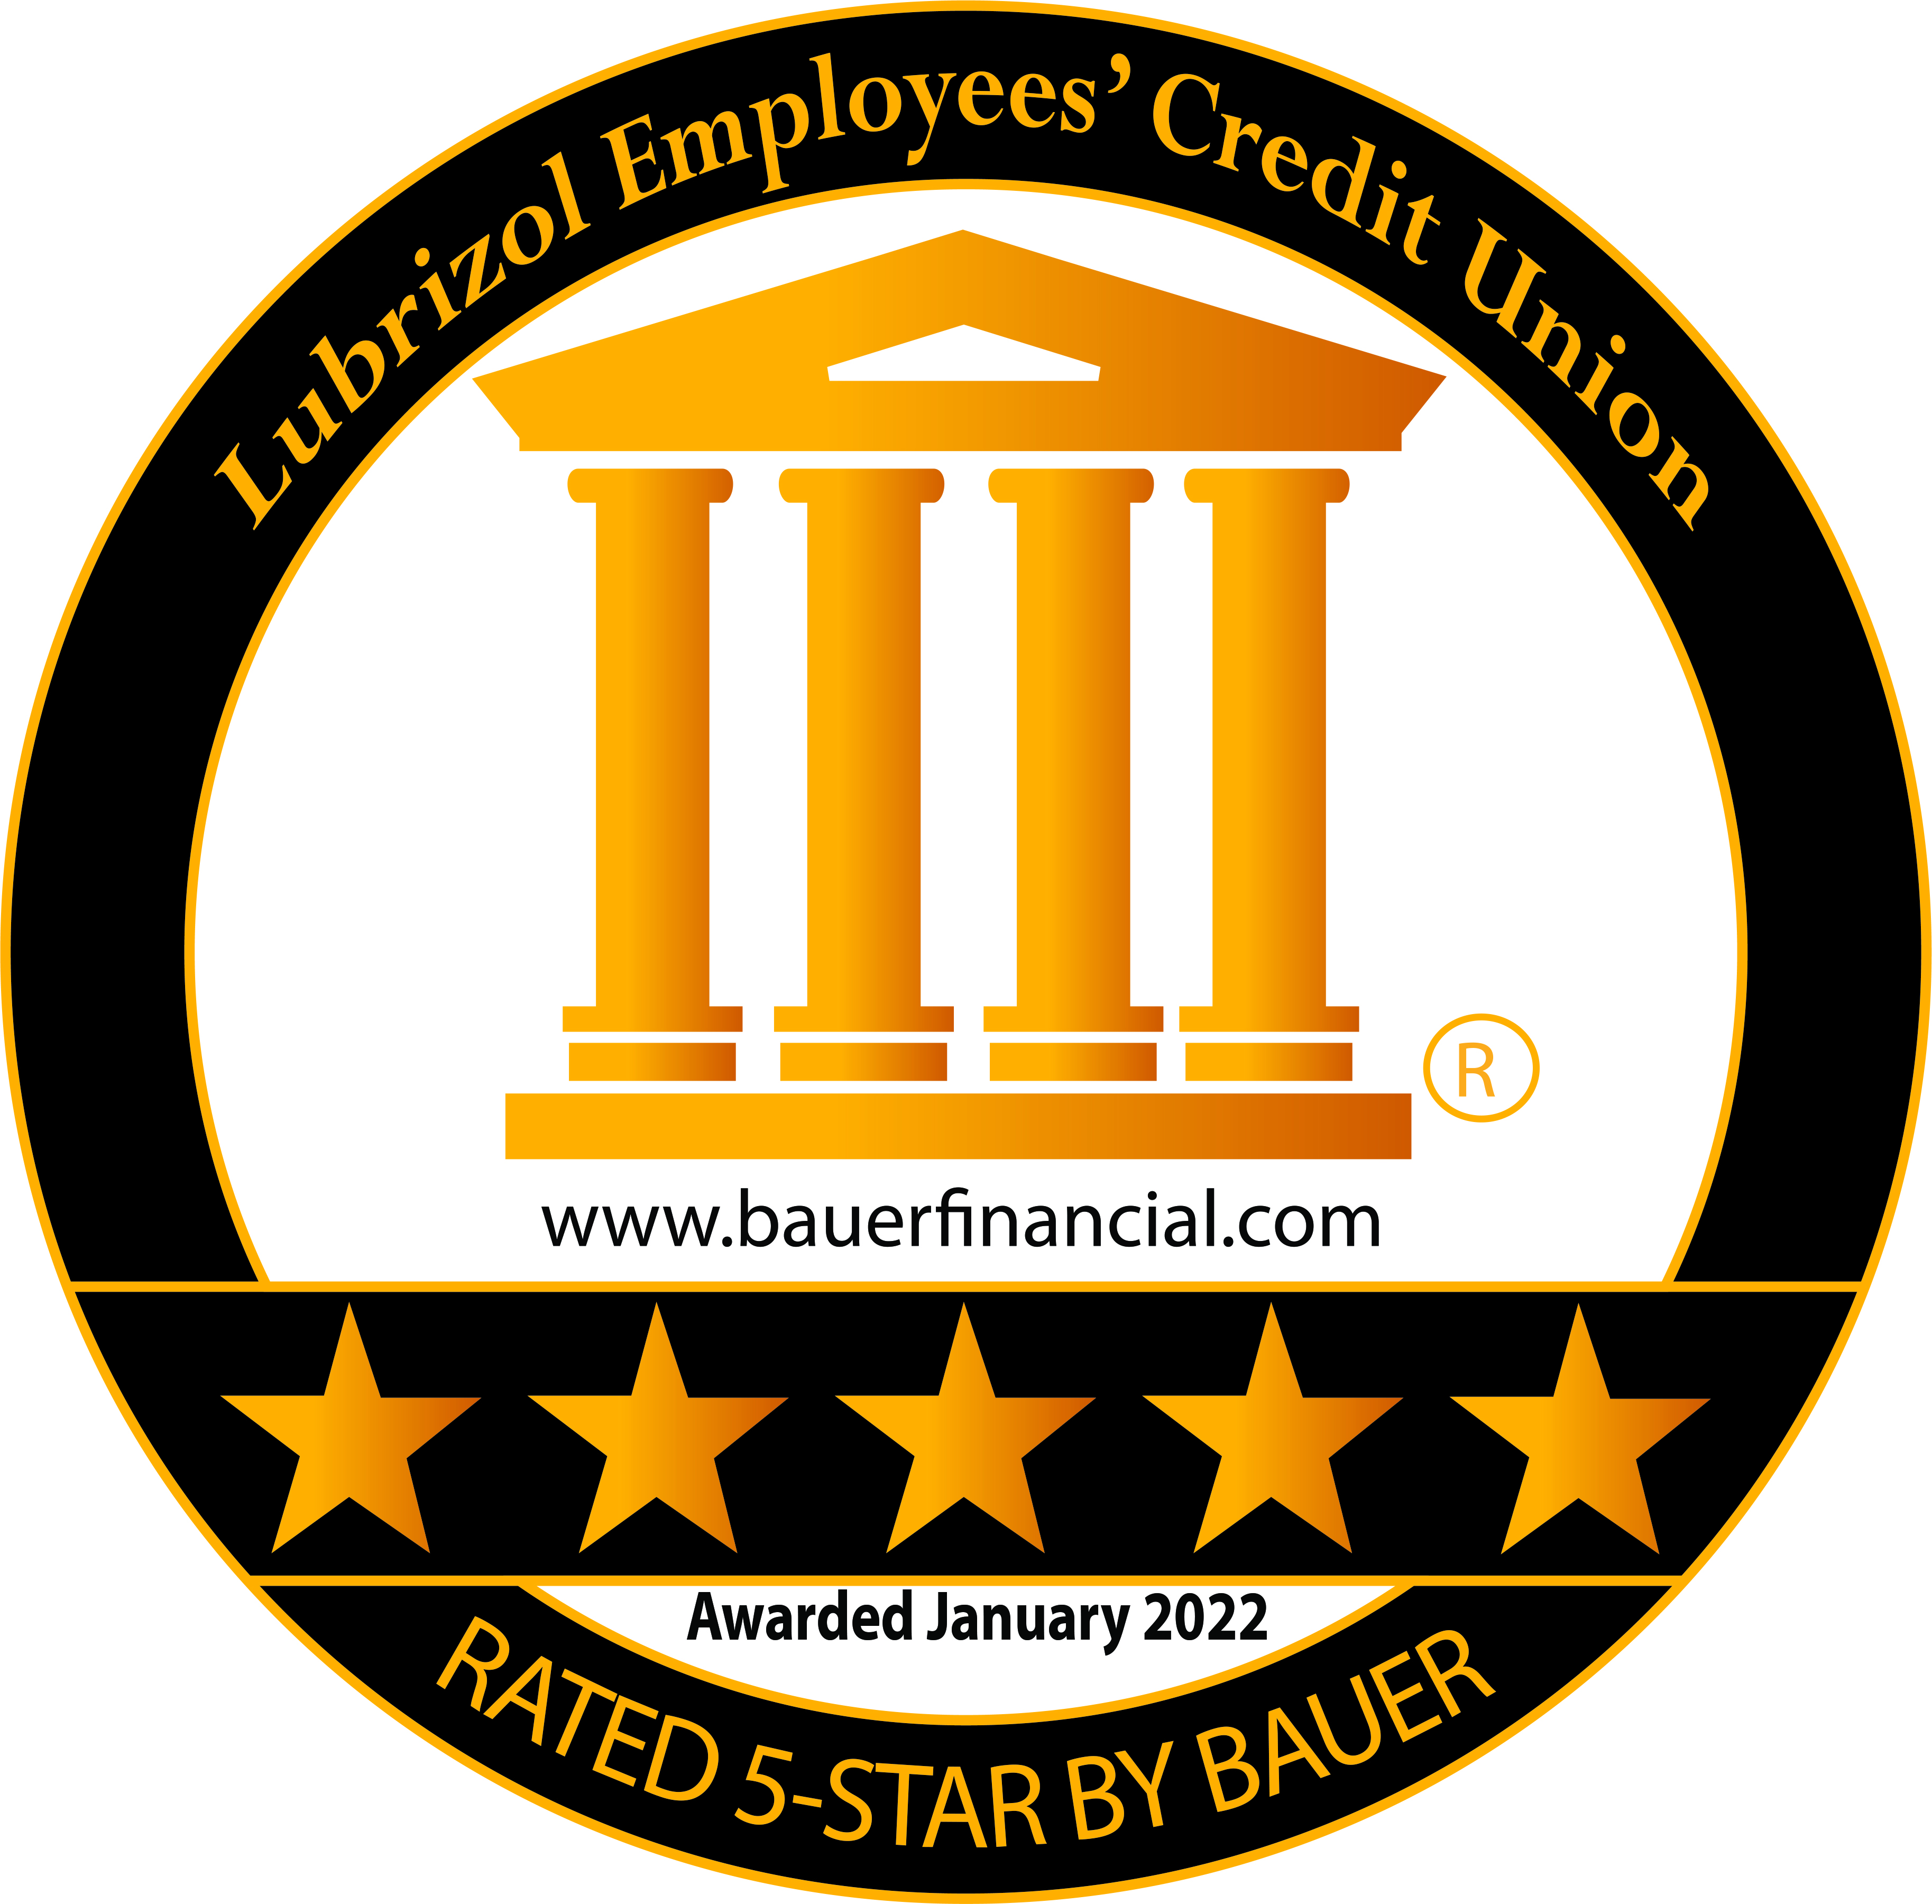 Bauer Financial 5 star rating awarded Jan 2022